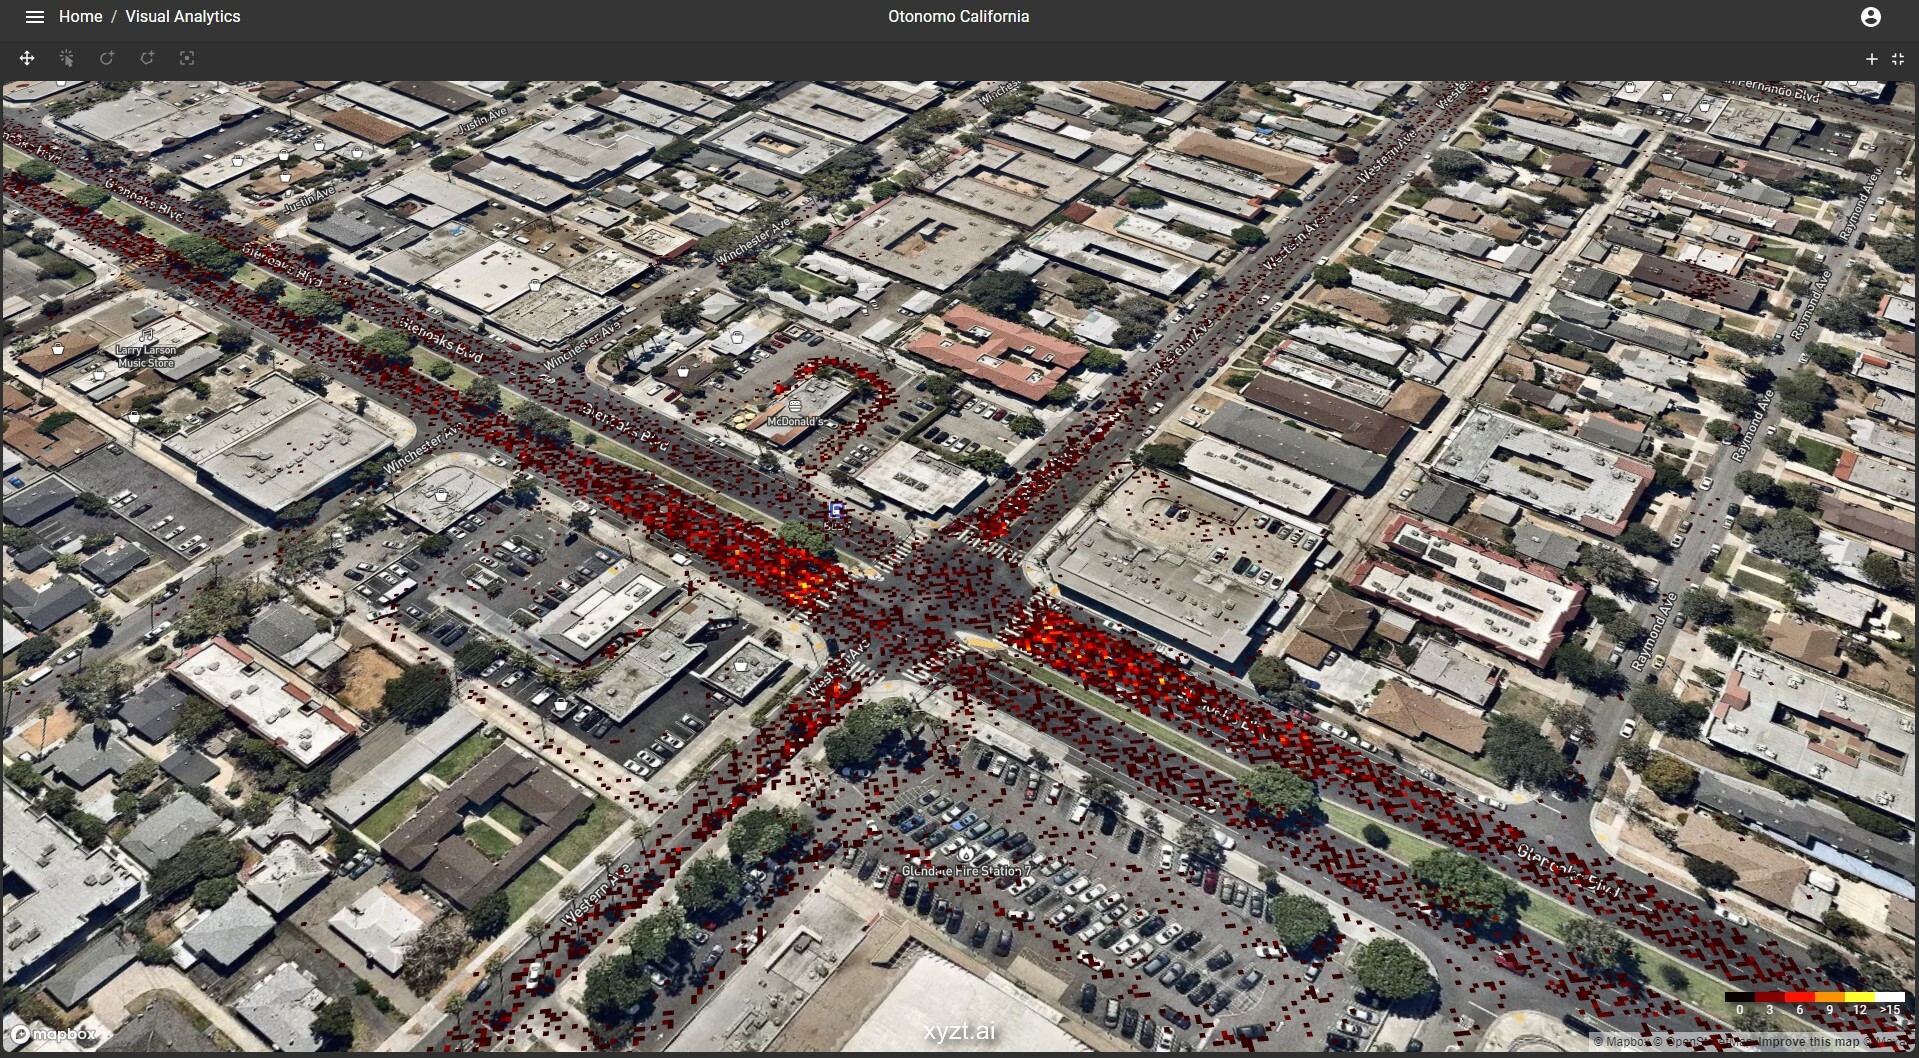 screenshot of one month of cross road traffic patterns in Los Angeles